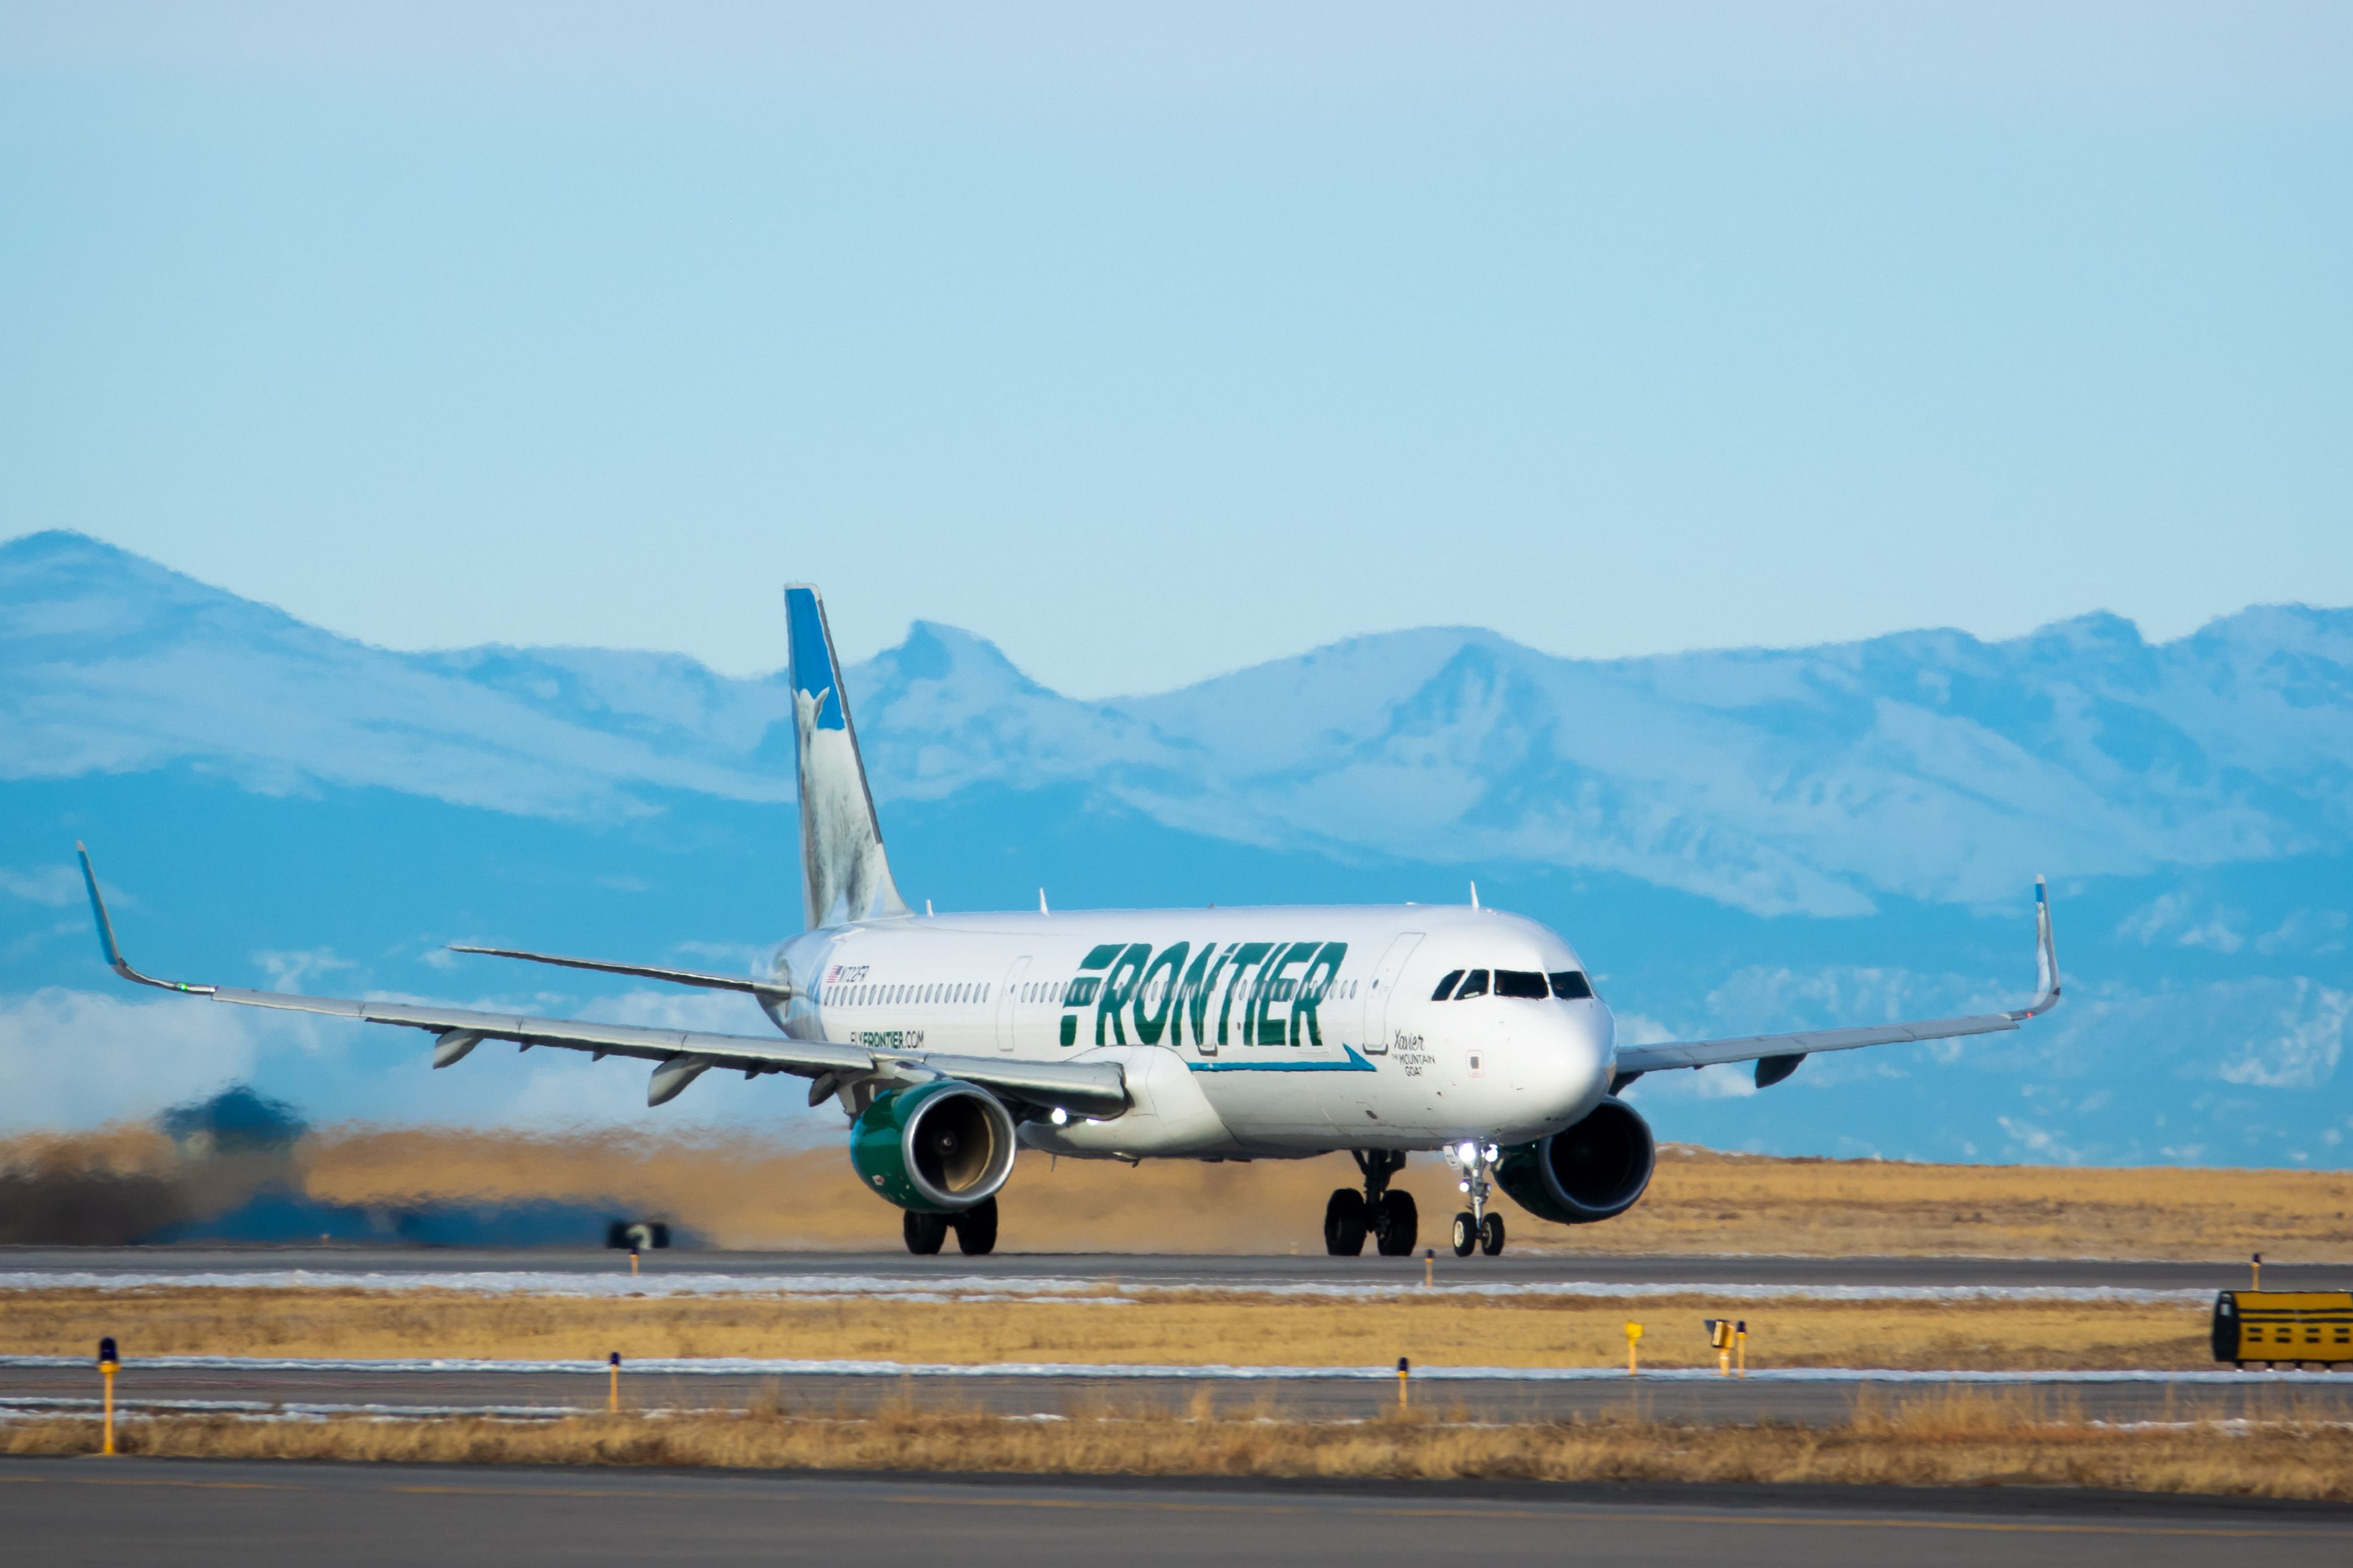 A Frontier Airlines Aircraft on an airport apron.